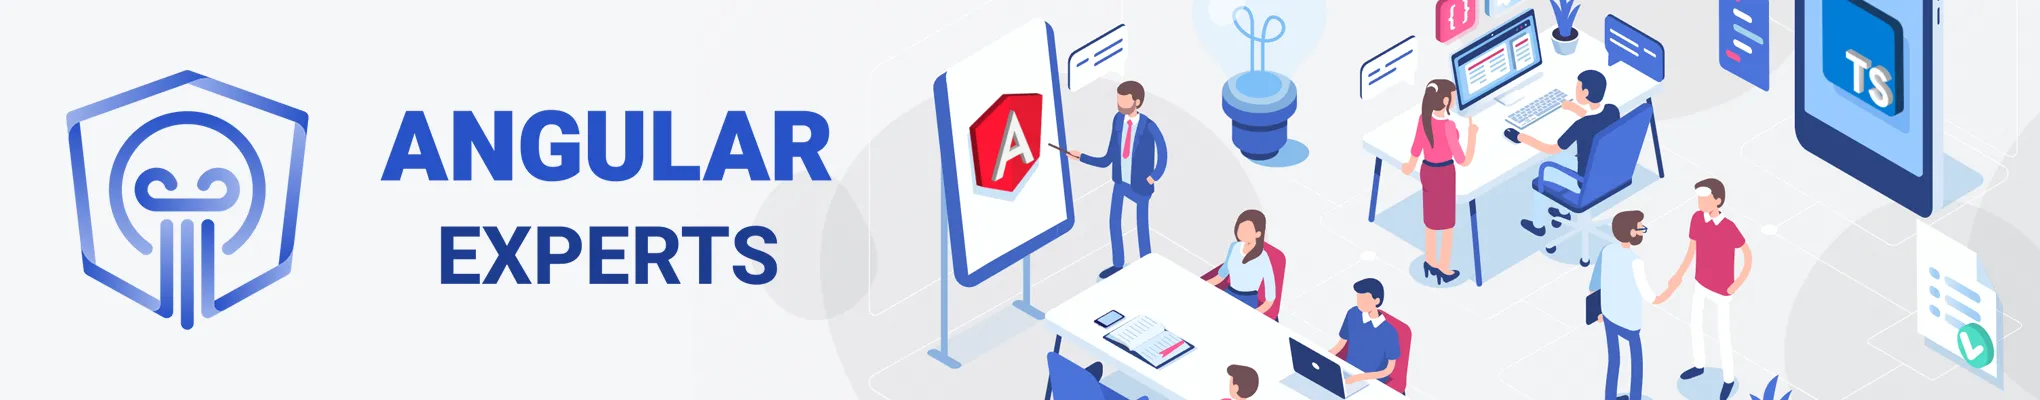 Angular Experts Consulting